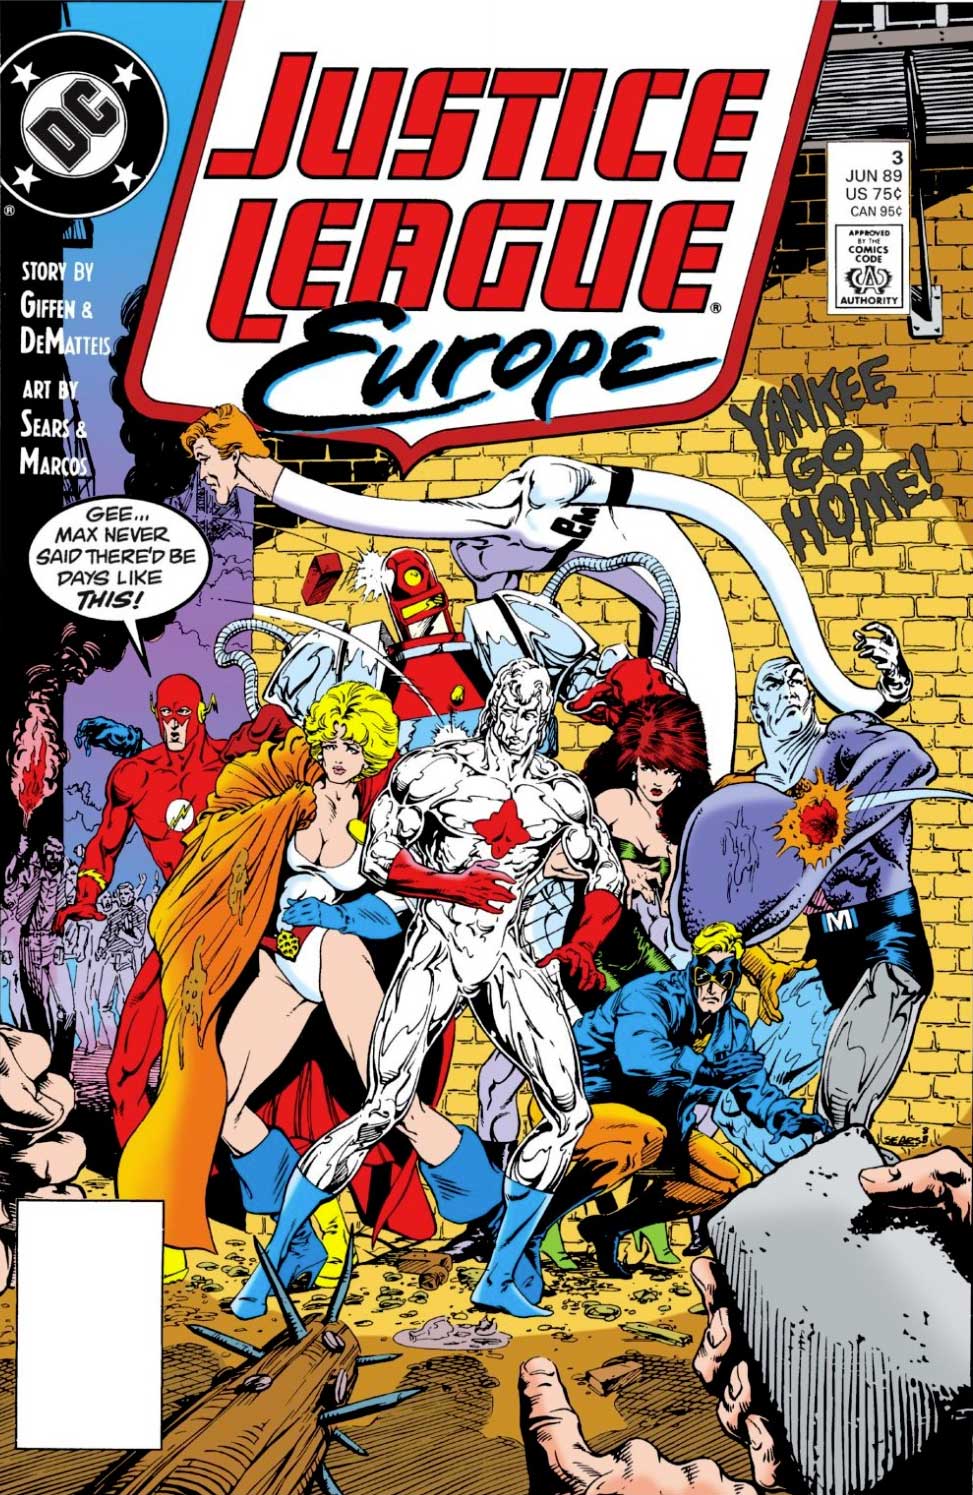 Justice League Europe #3 cover by Bart Sears